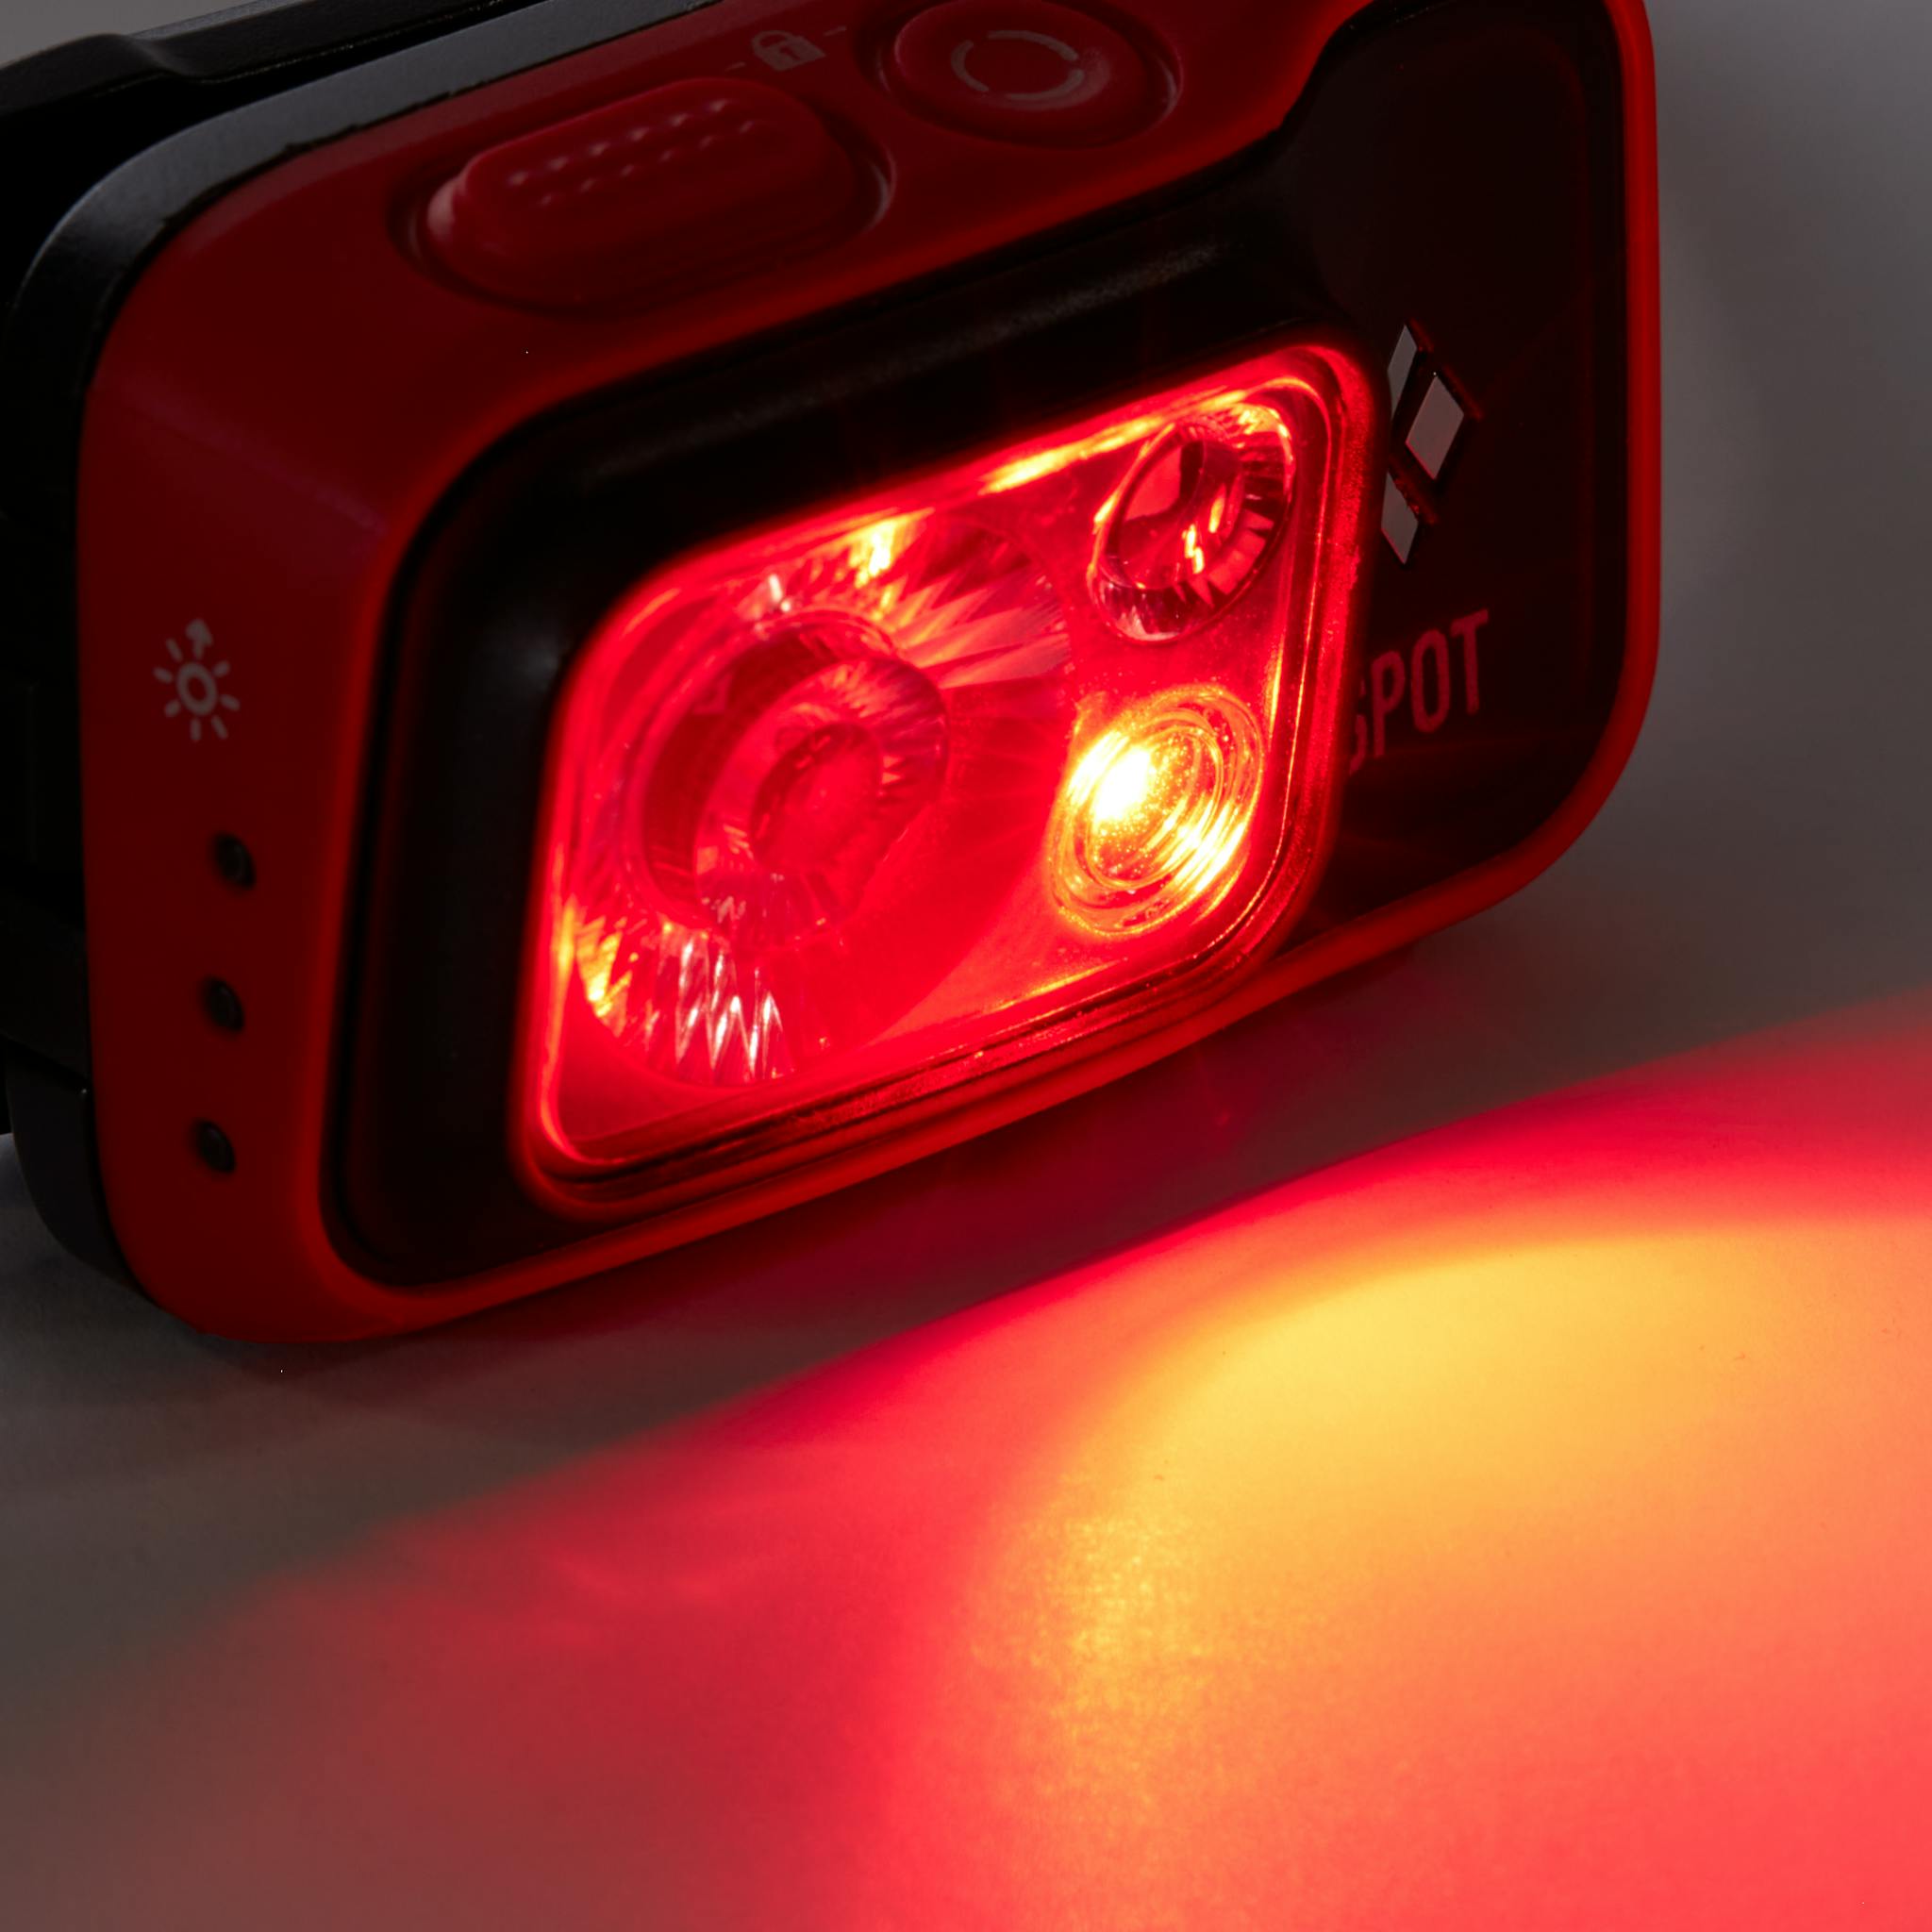 A picture of the Spot 400 headlamp illuminating the red LED.